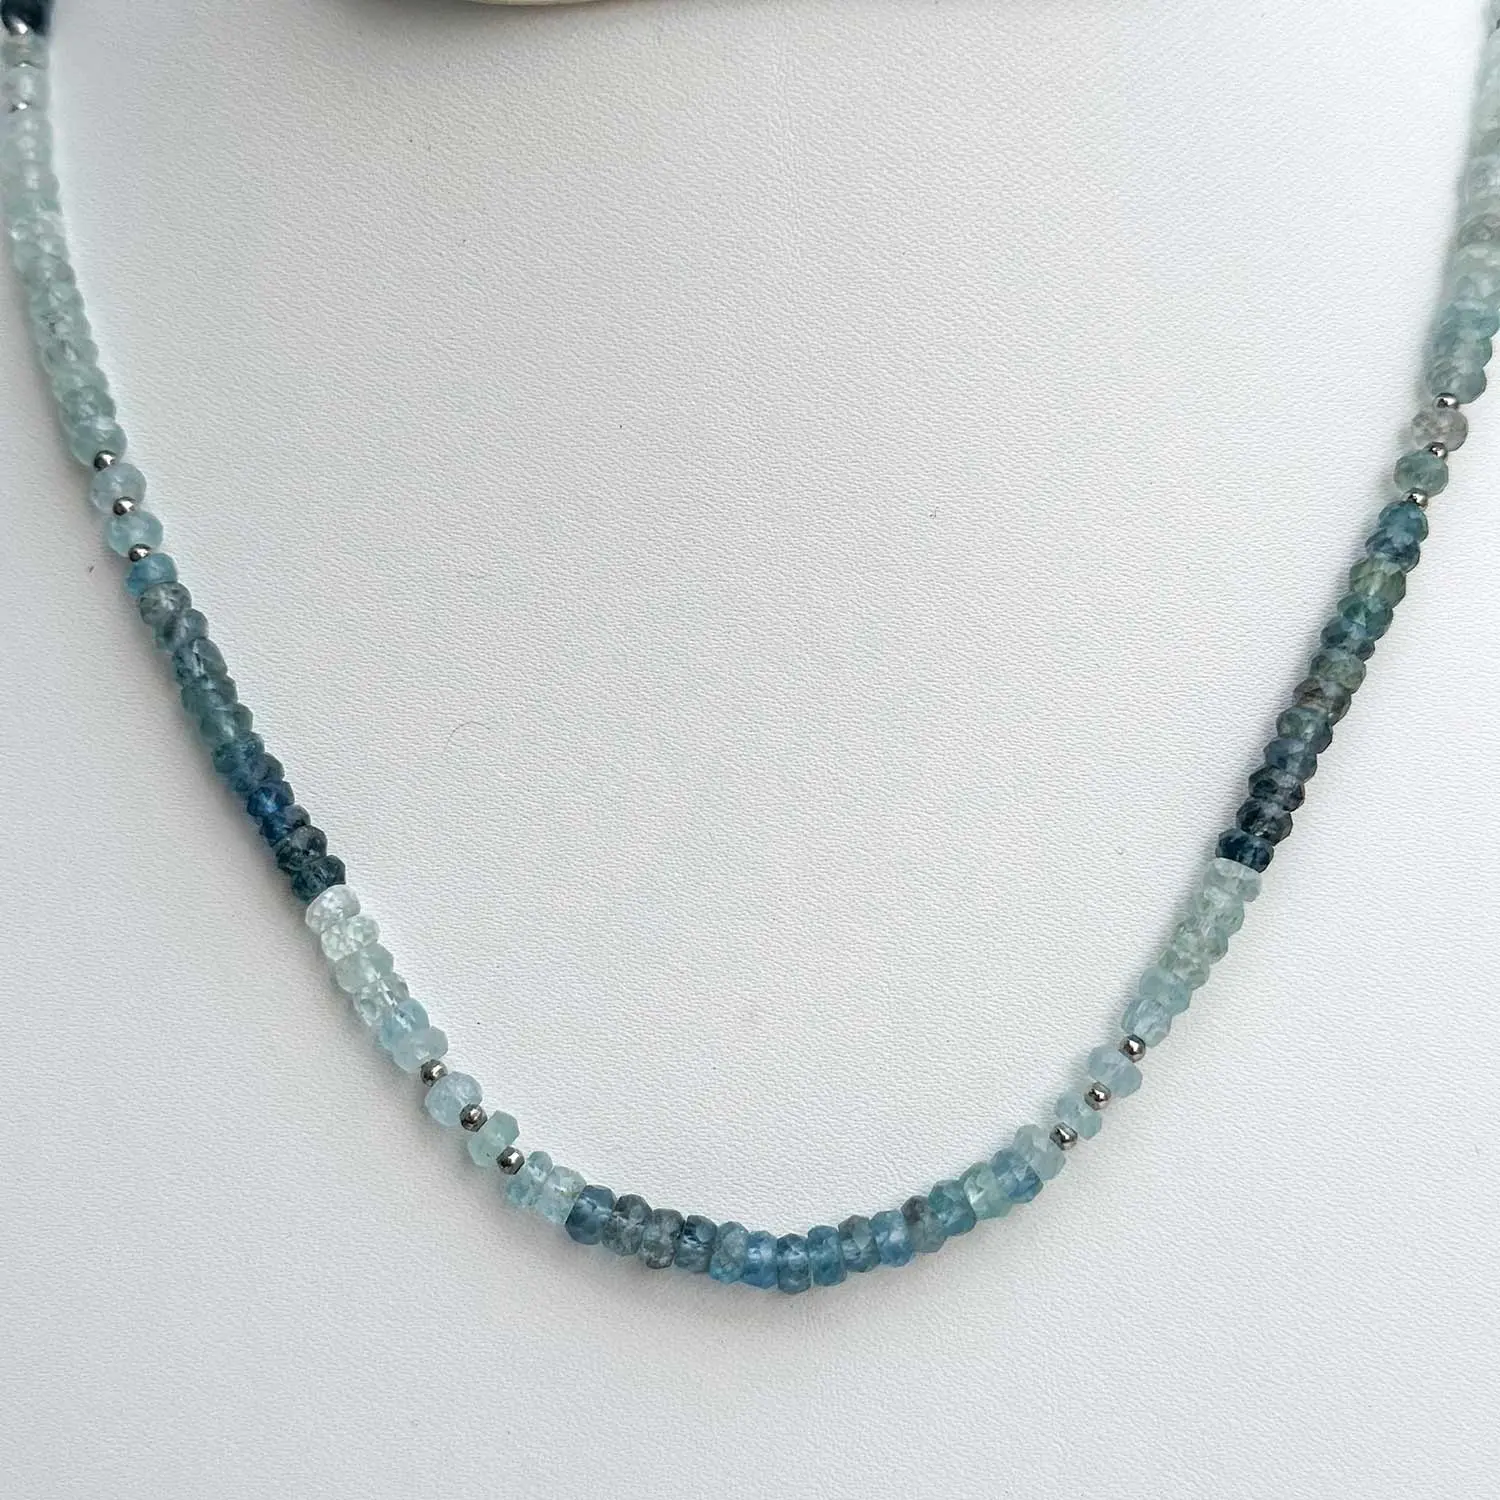 Extremely Fine Quality Natural Moss Aquamarine Faceted Rondelle Gemstone Beads Luxury Necklace Handmade Stone Jewelry